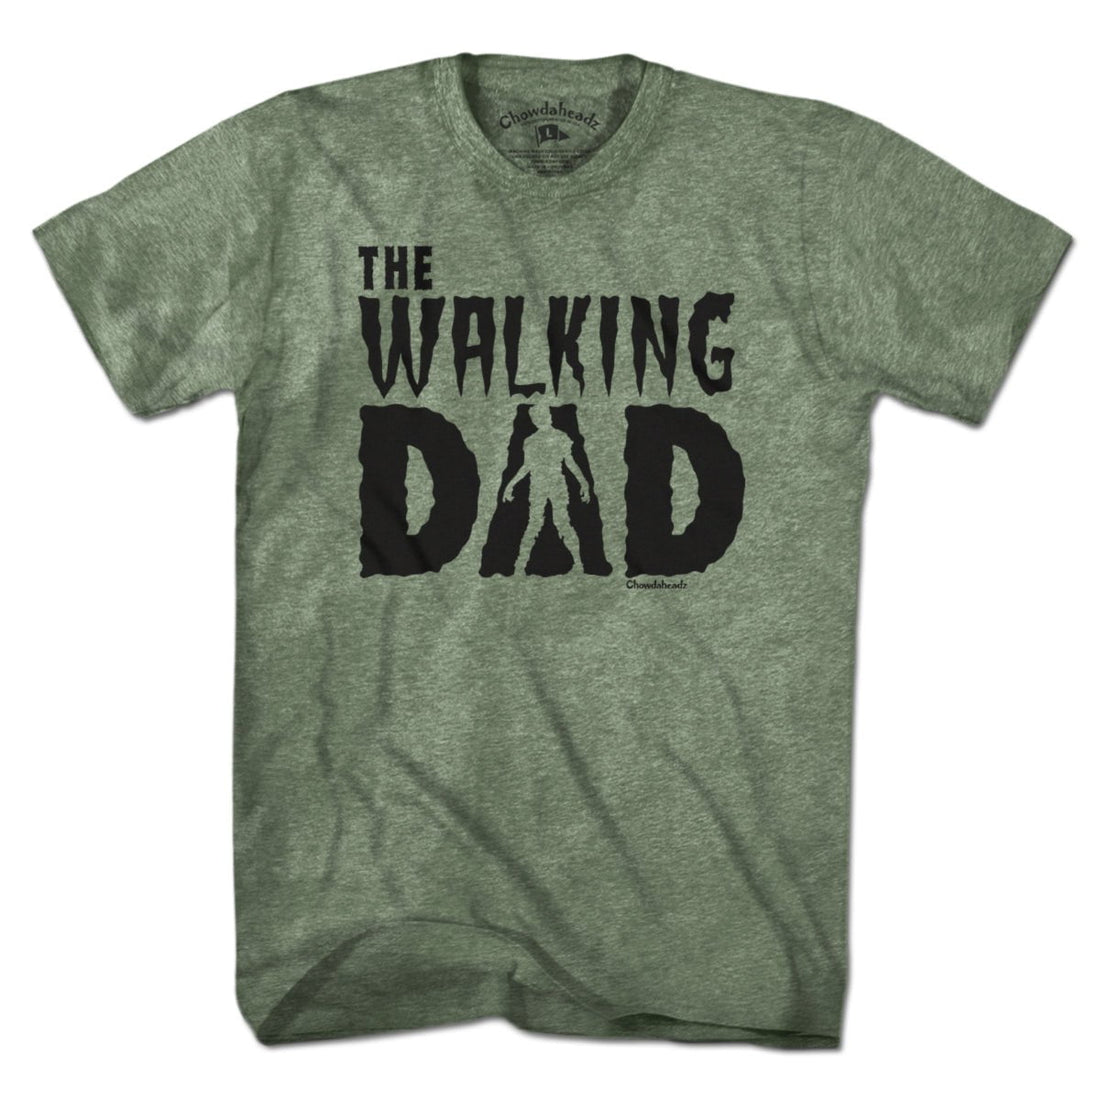 The Walking Dad Funny Dad T-shirts, The Walking Dead Merchandise